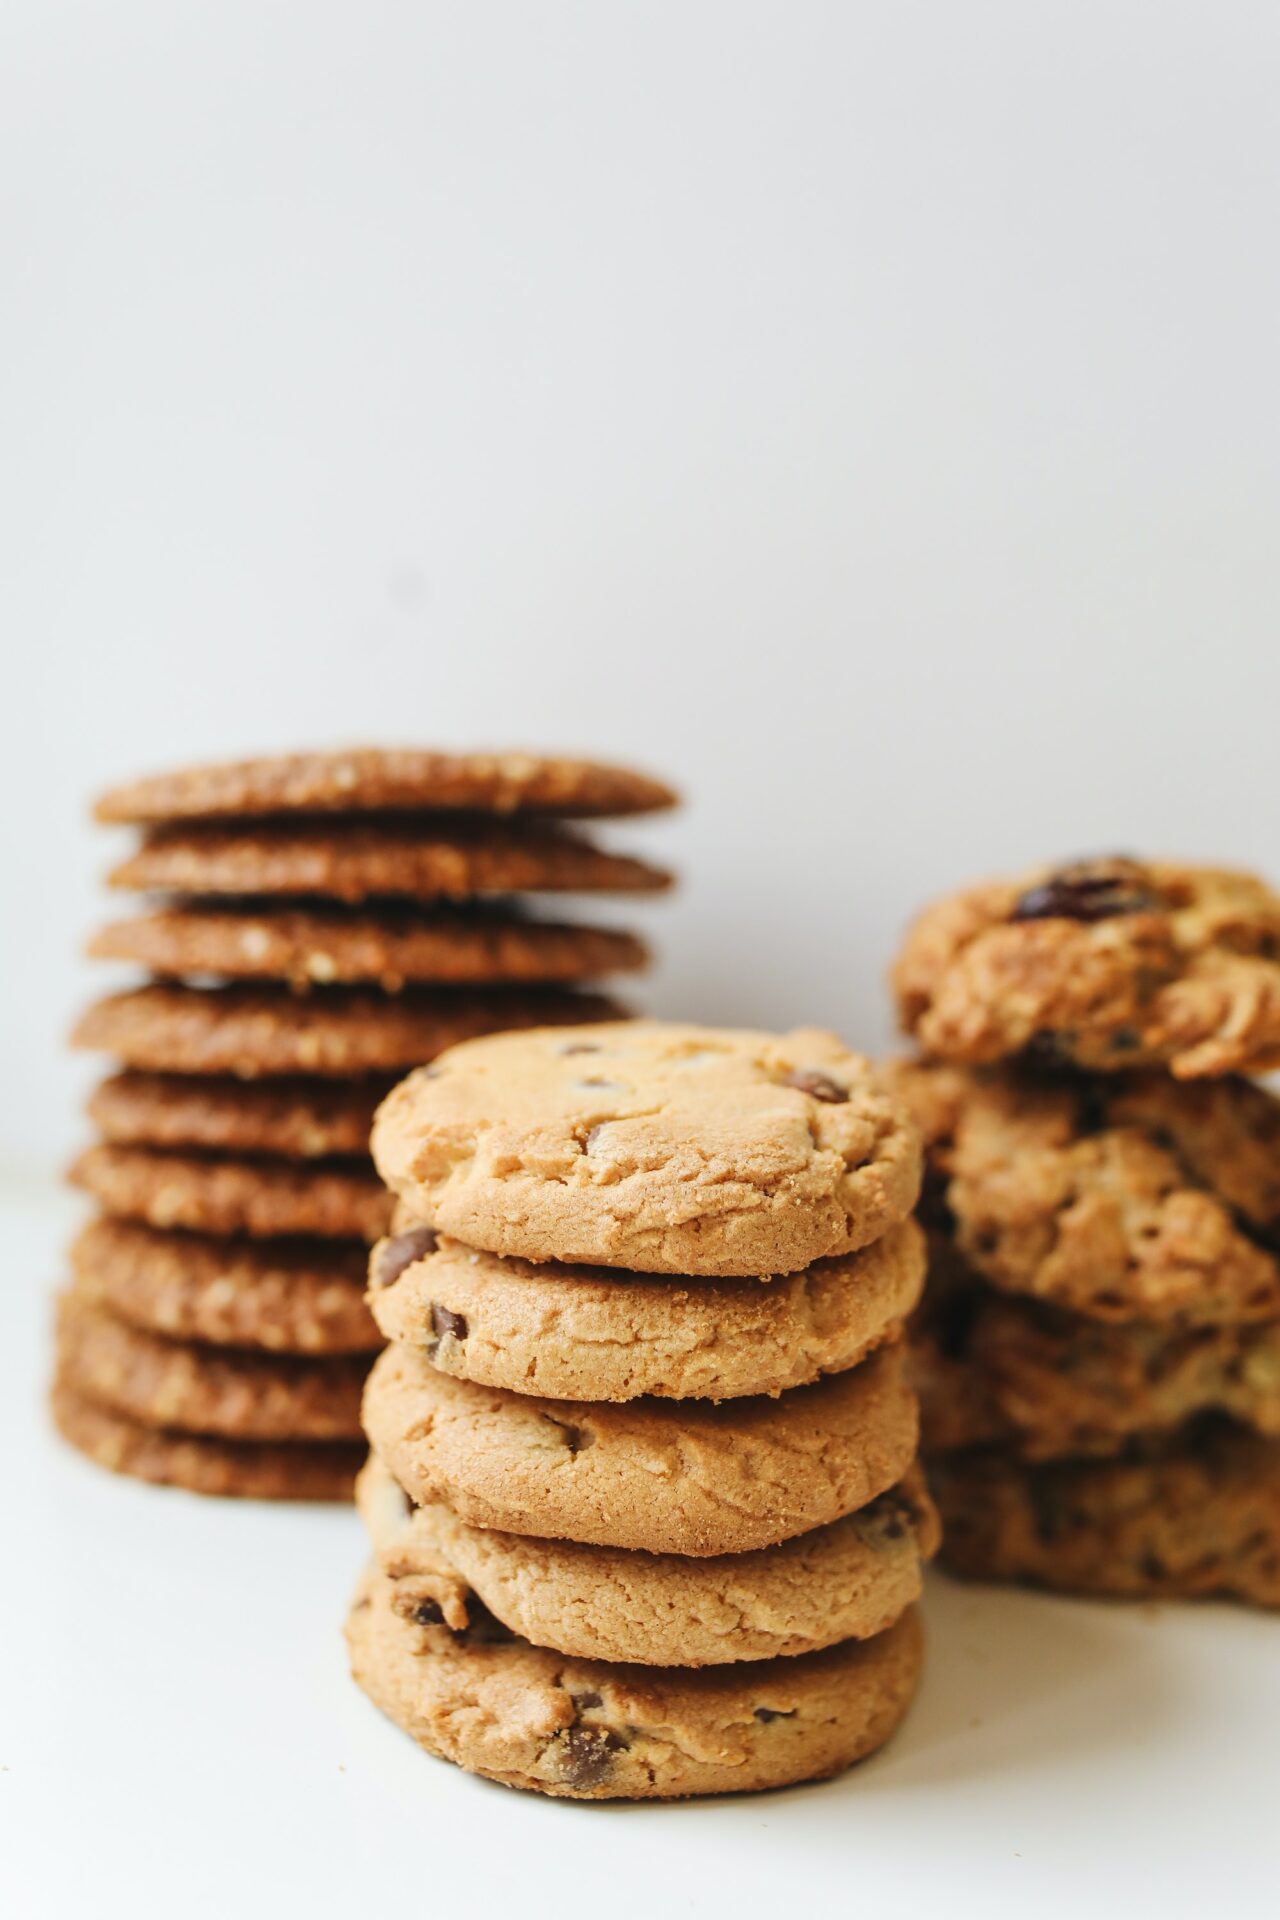 Stacks of cookies (Photo by Polina Tankilevitch from Pexels)